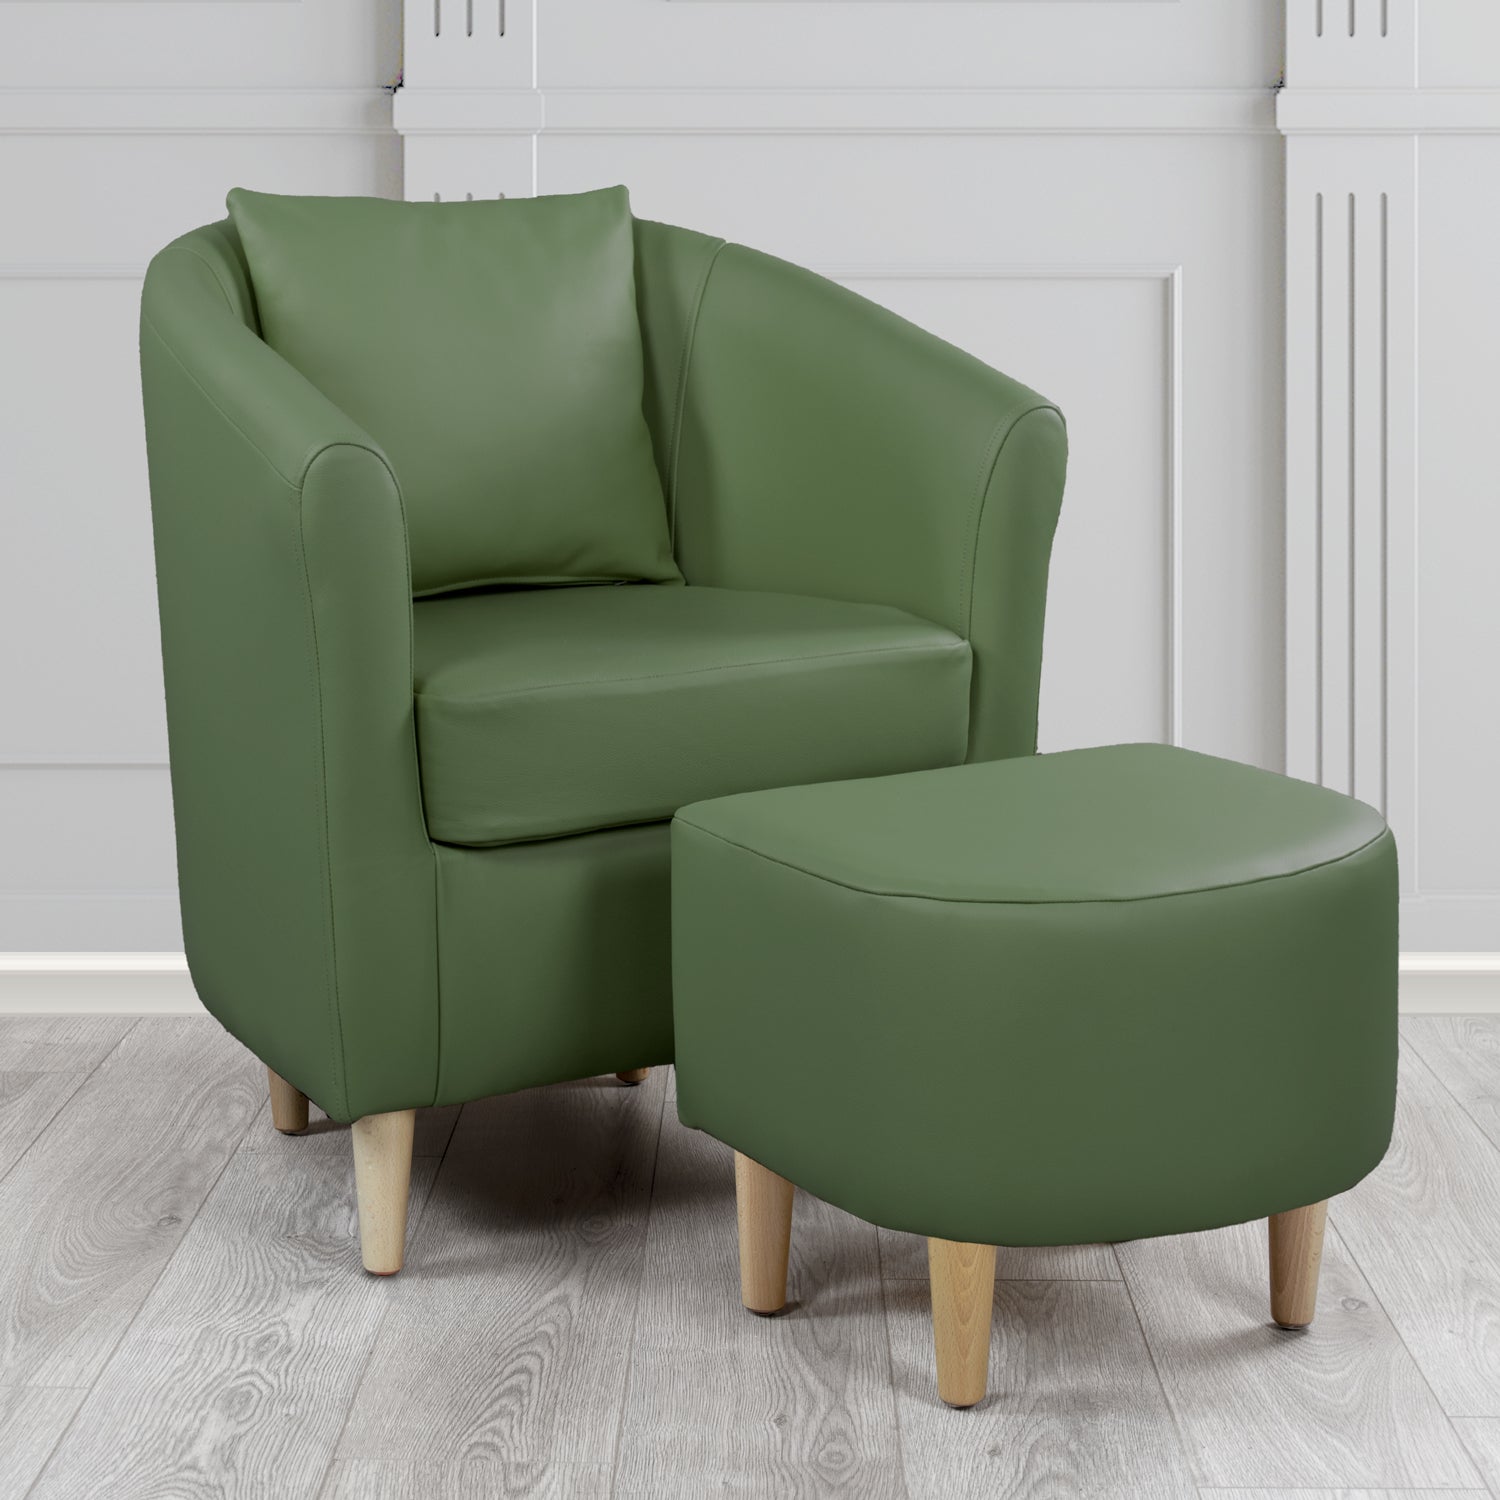 St Tropez Shelly Forest Green Crib 5 Genuine Leather Tub Chair & Footstool Set With Scatter Cushion (6619497005098)